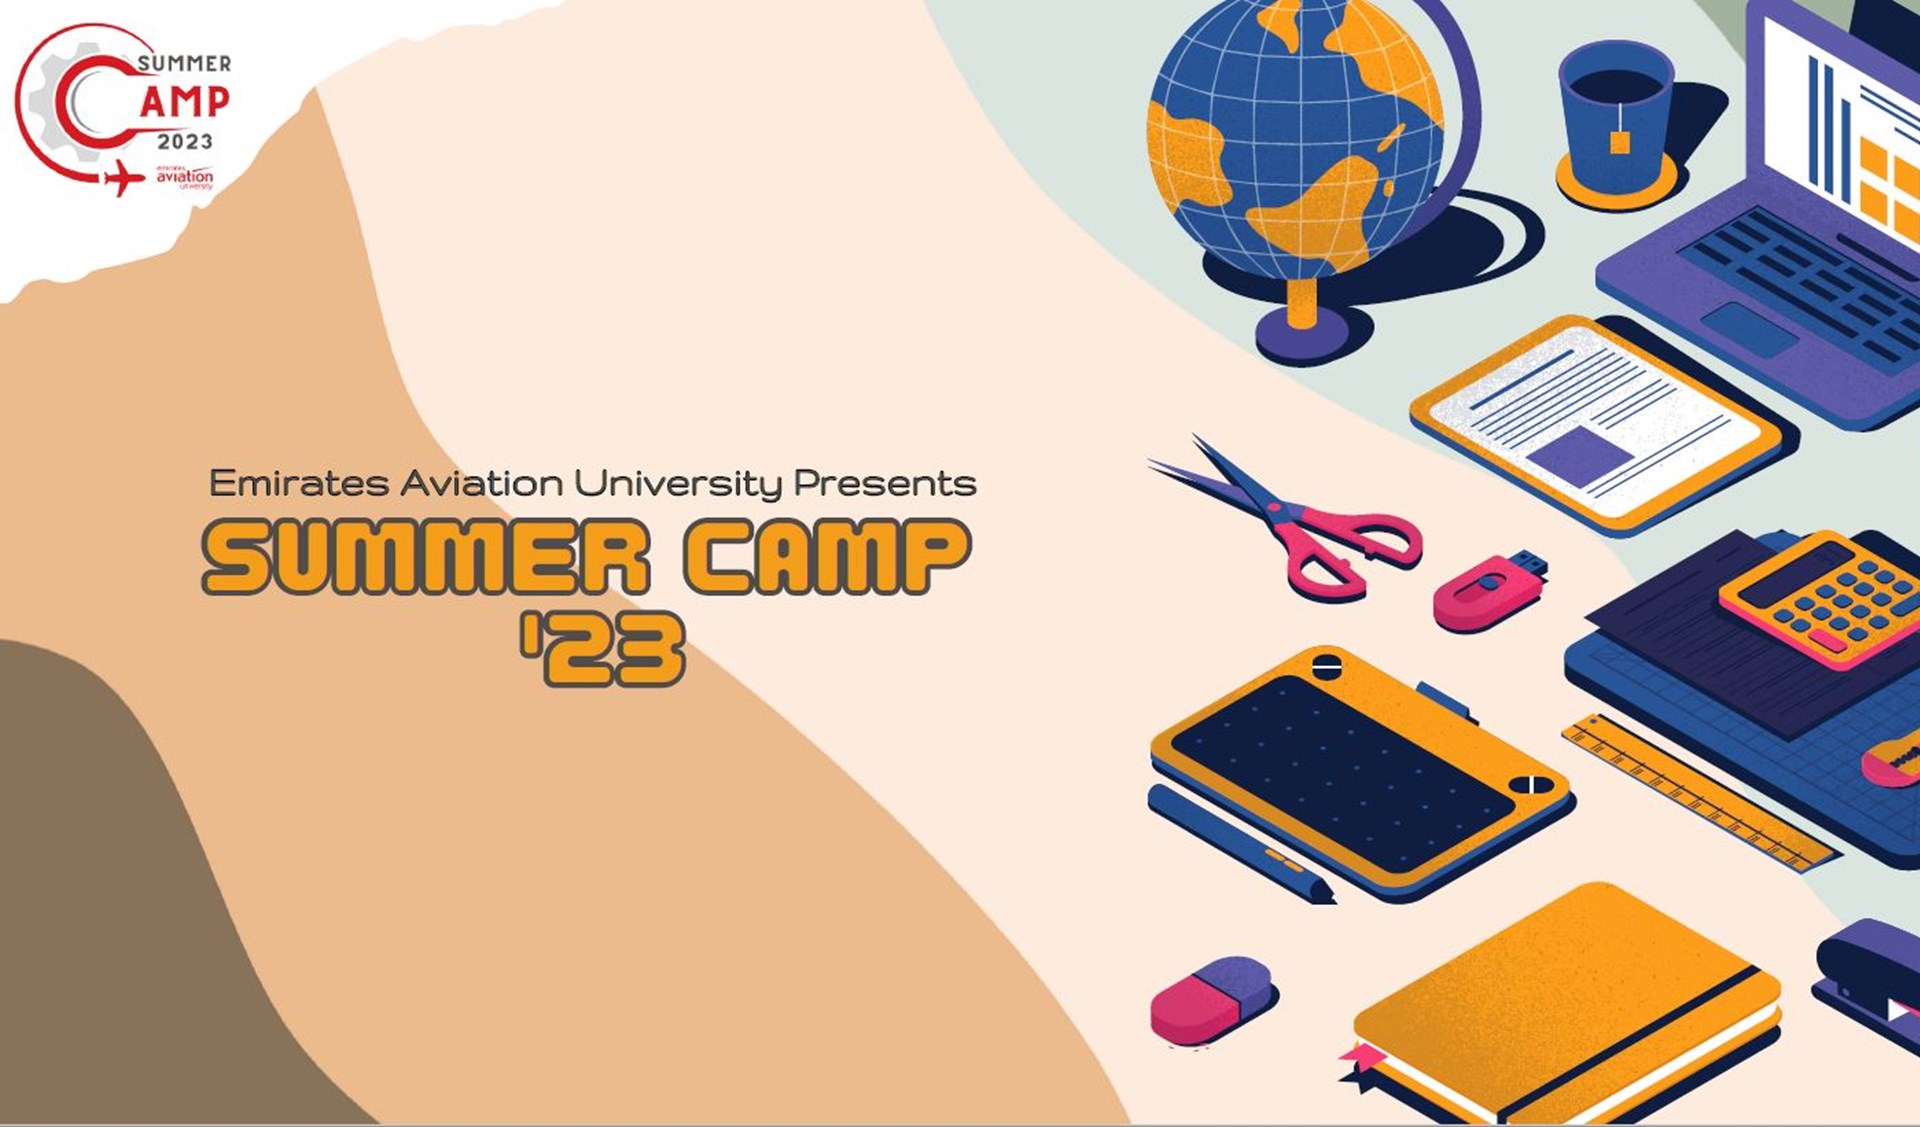 Summer Camp Background Picture.JPG